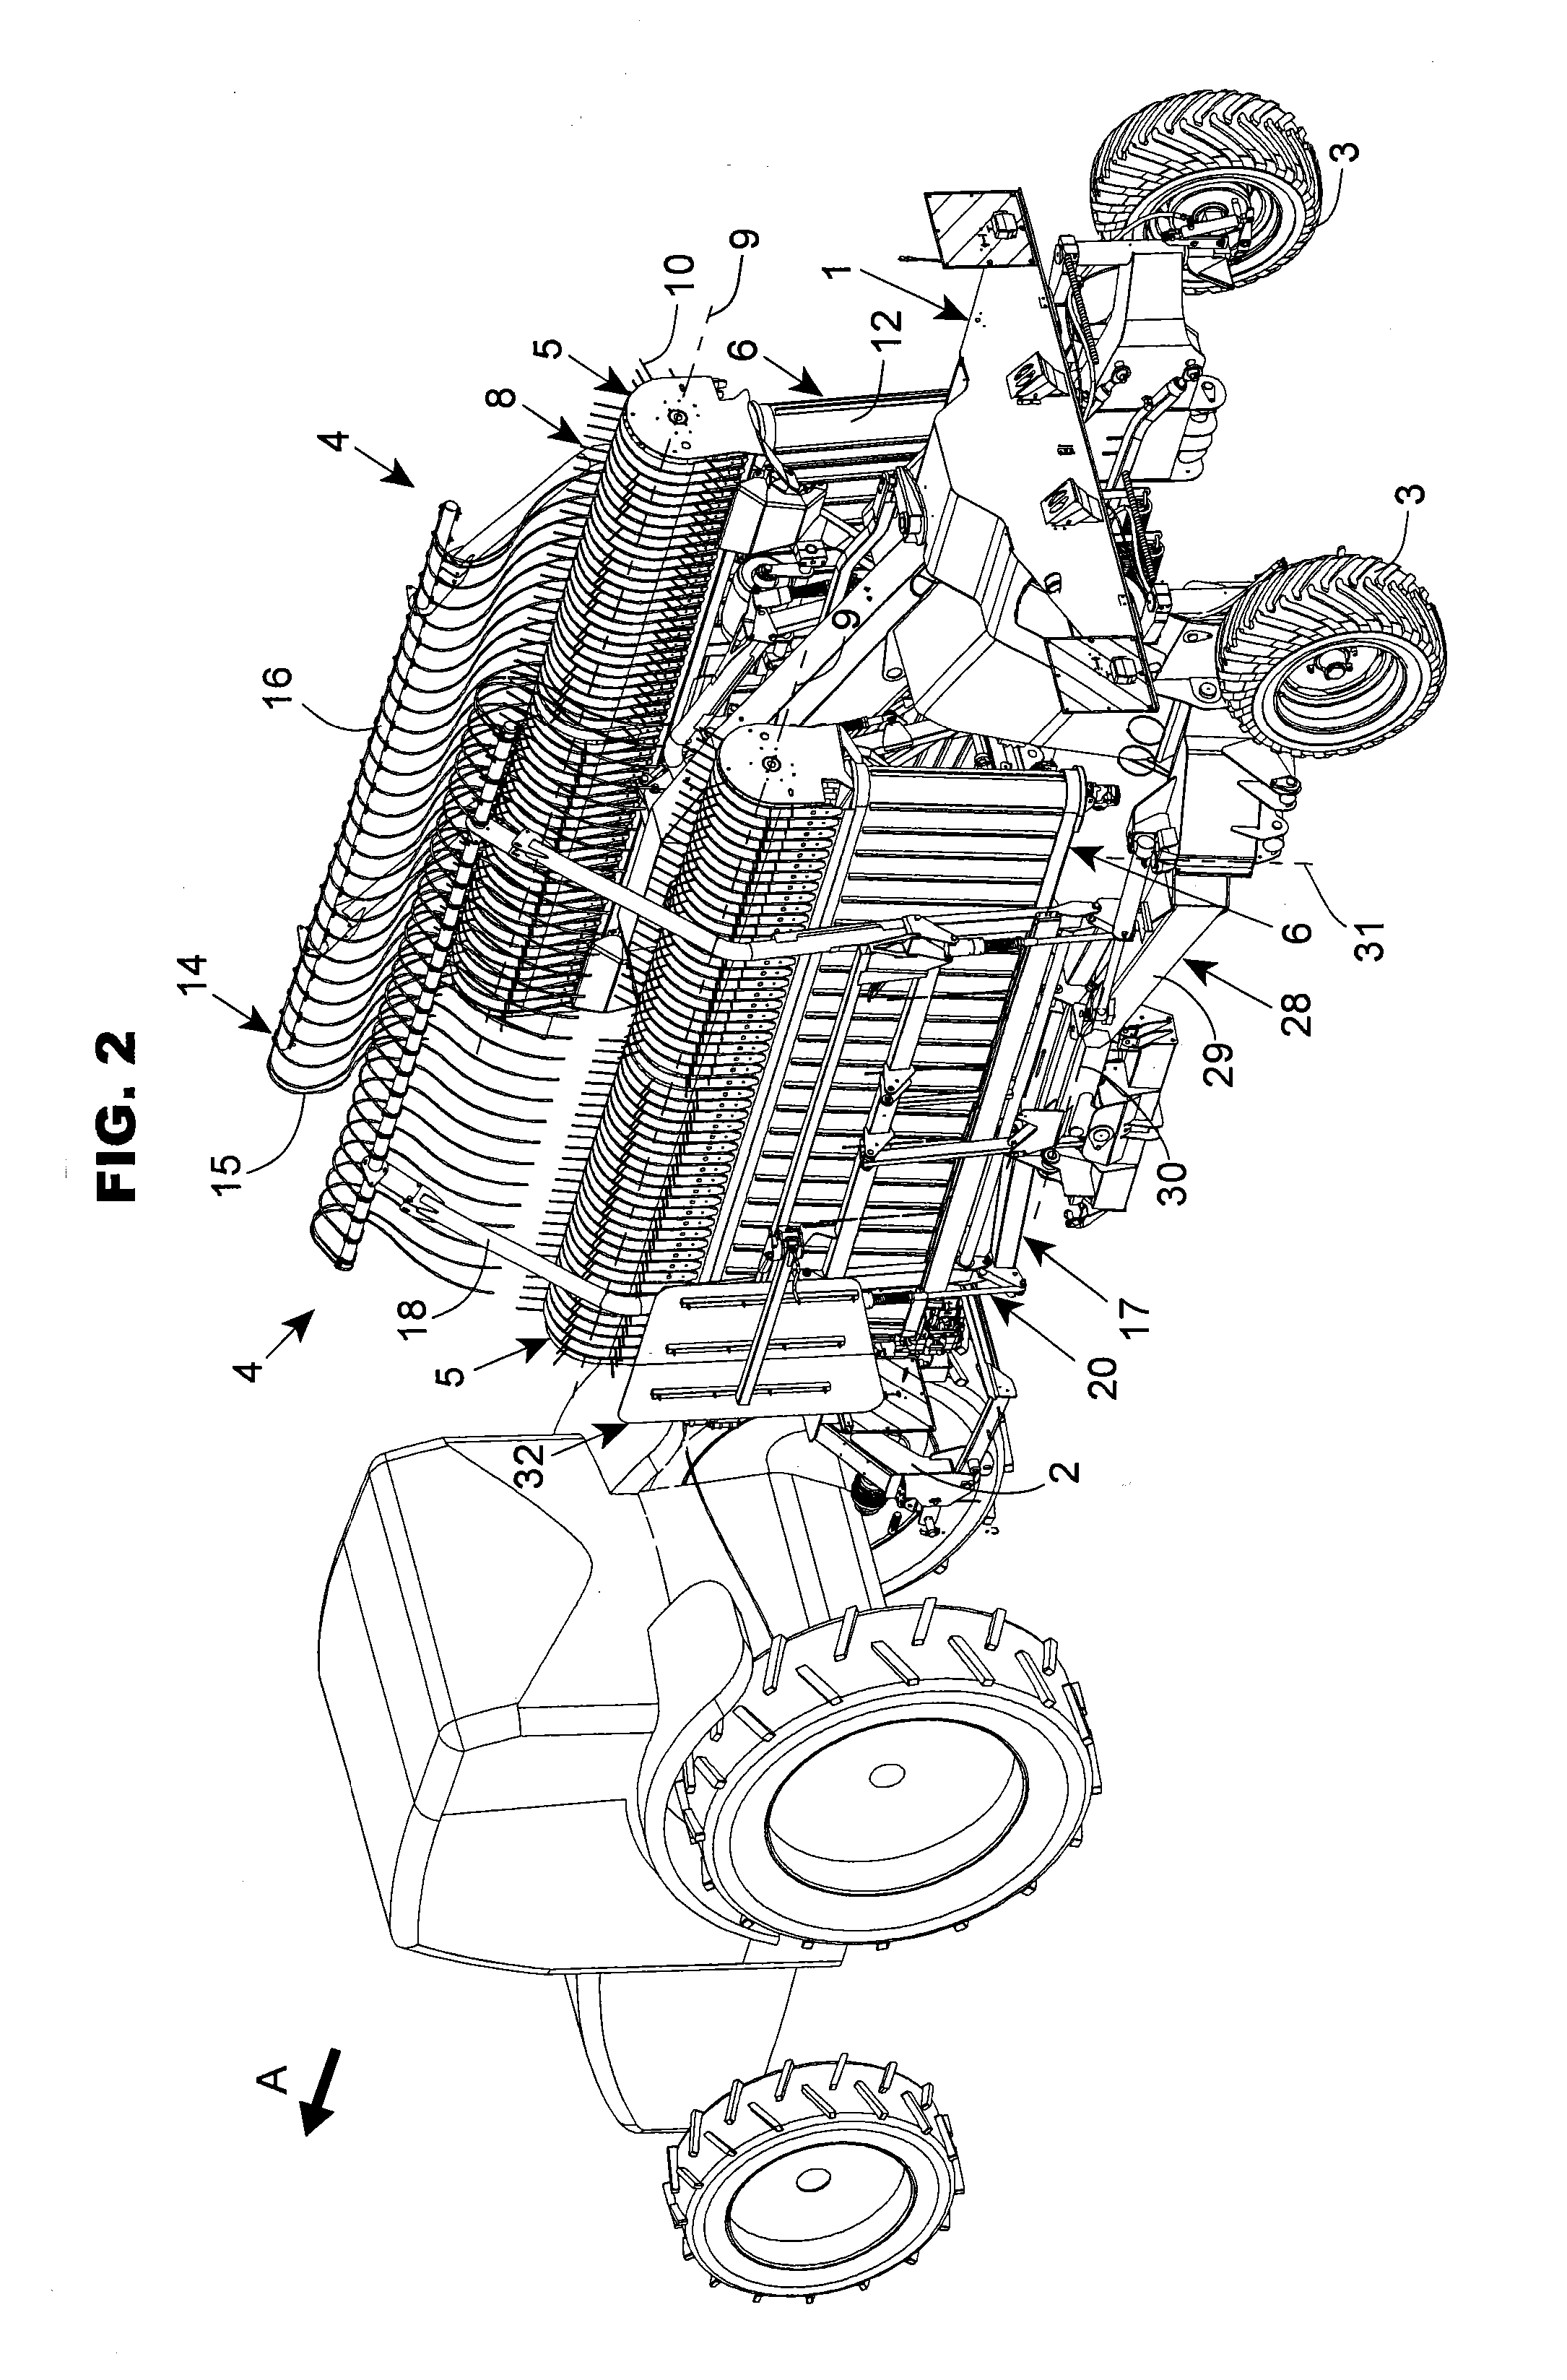 Haymaking machine comprising an improved deflector